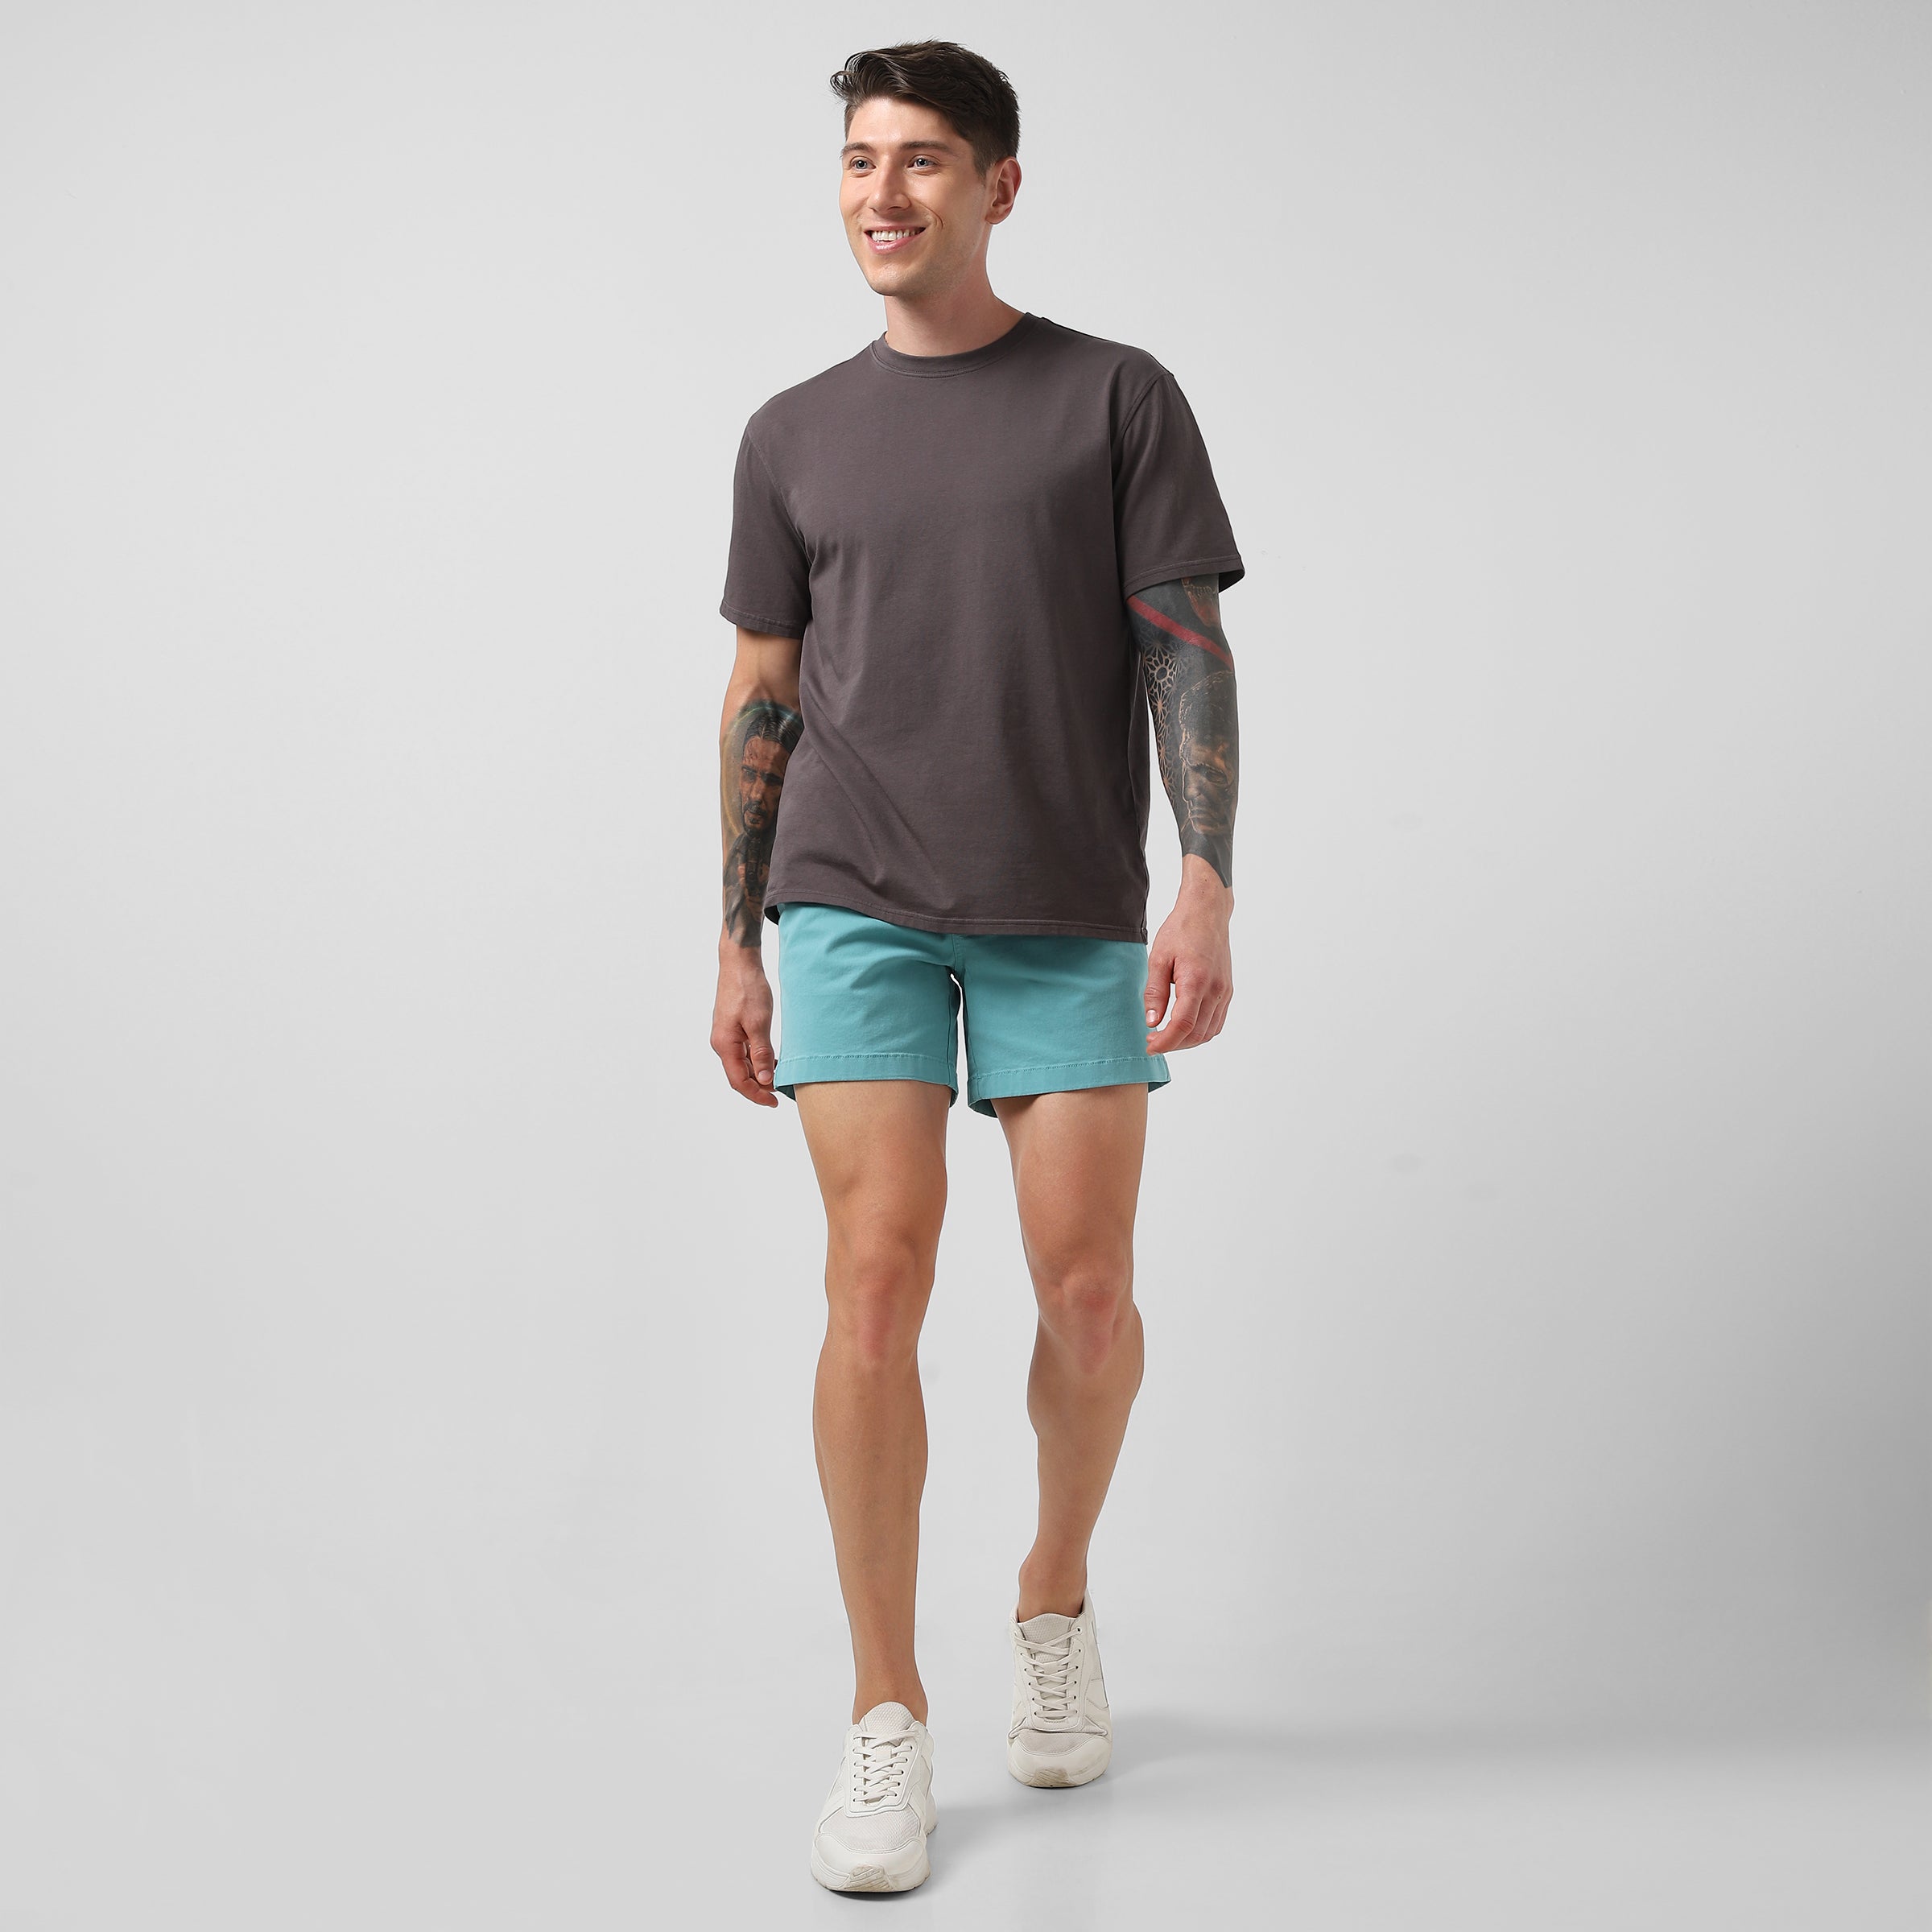 Stretch Short 5.5" Marine on model worn with Supima Tee in Cocoa